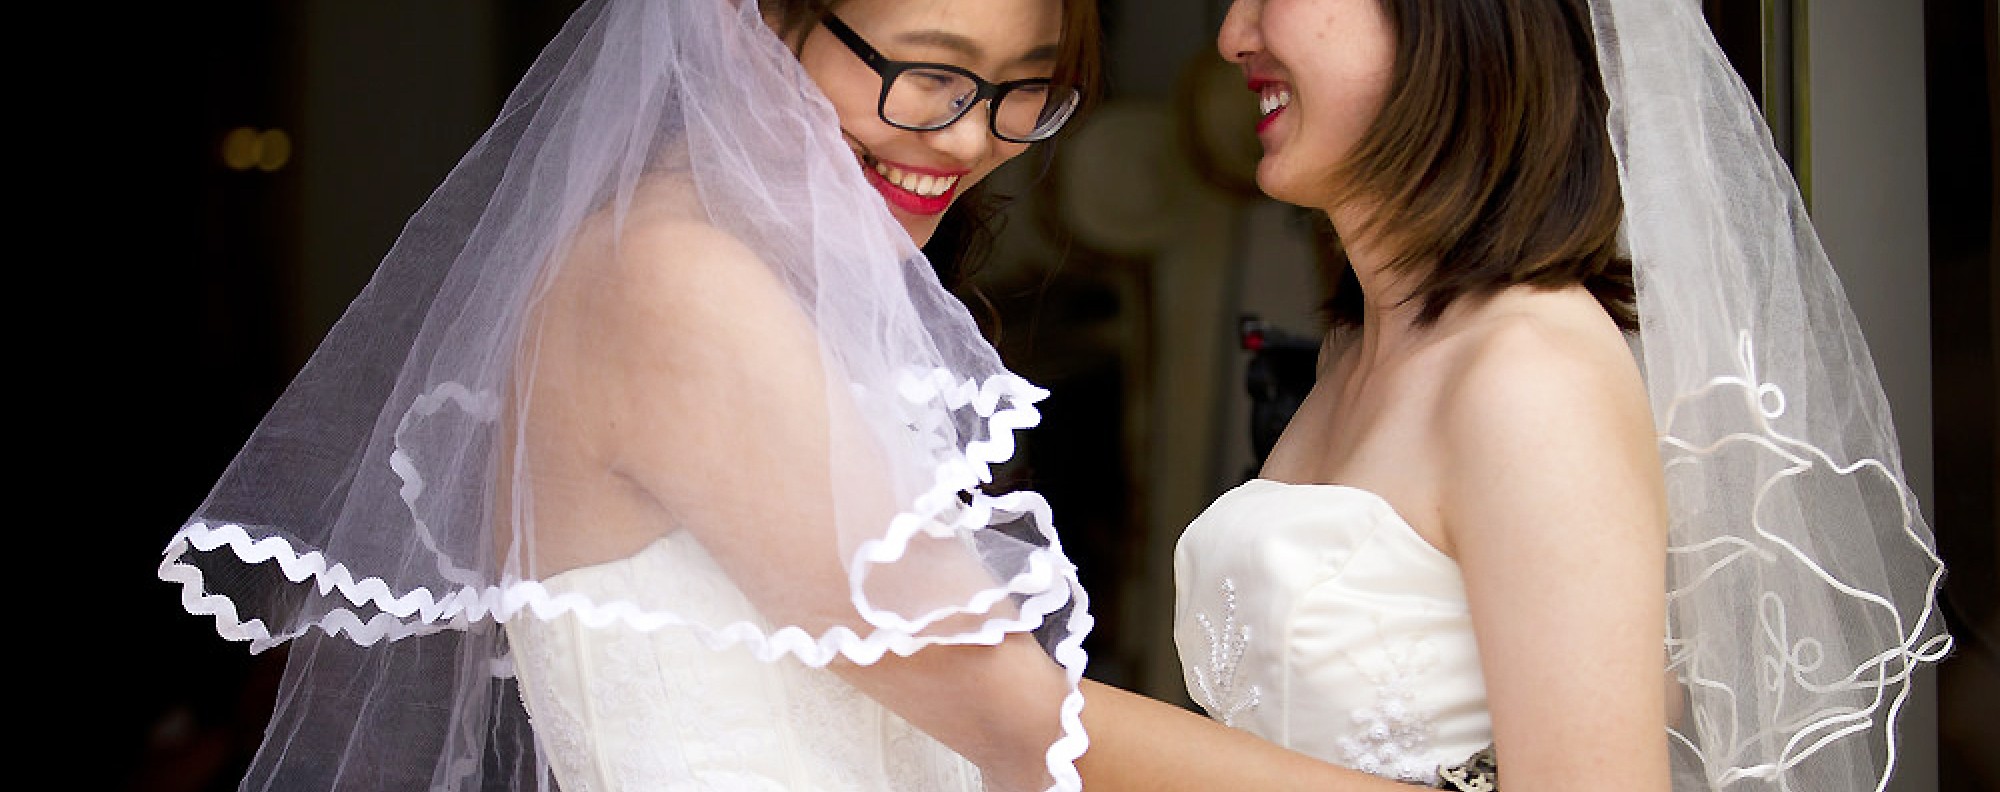 Lesbian couple hold marriage ceremony to push for legal same-sex unions in China South China Morning Post image